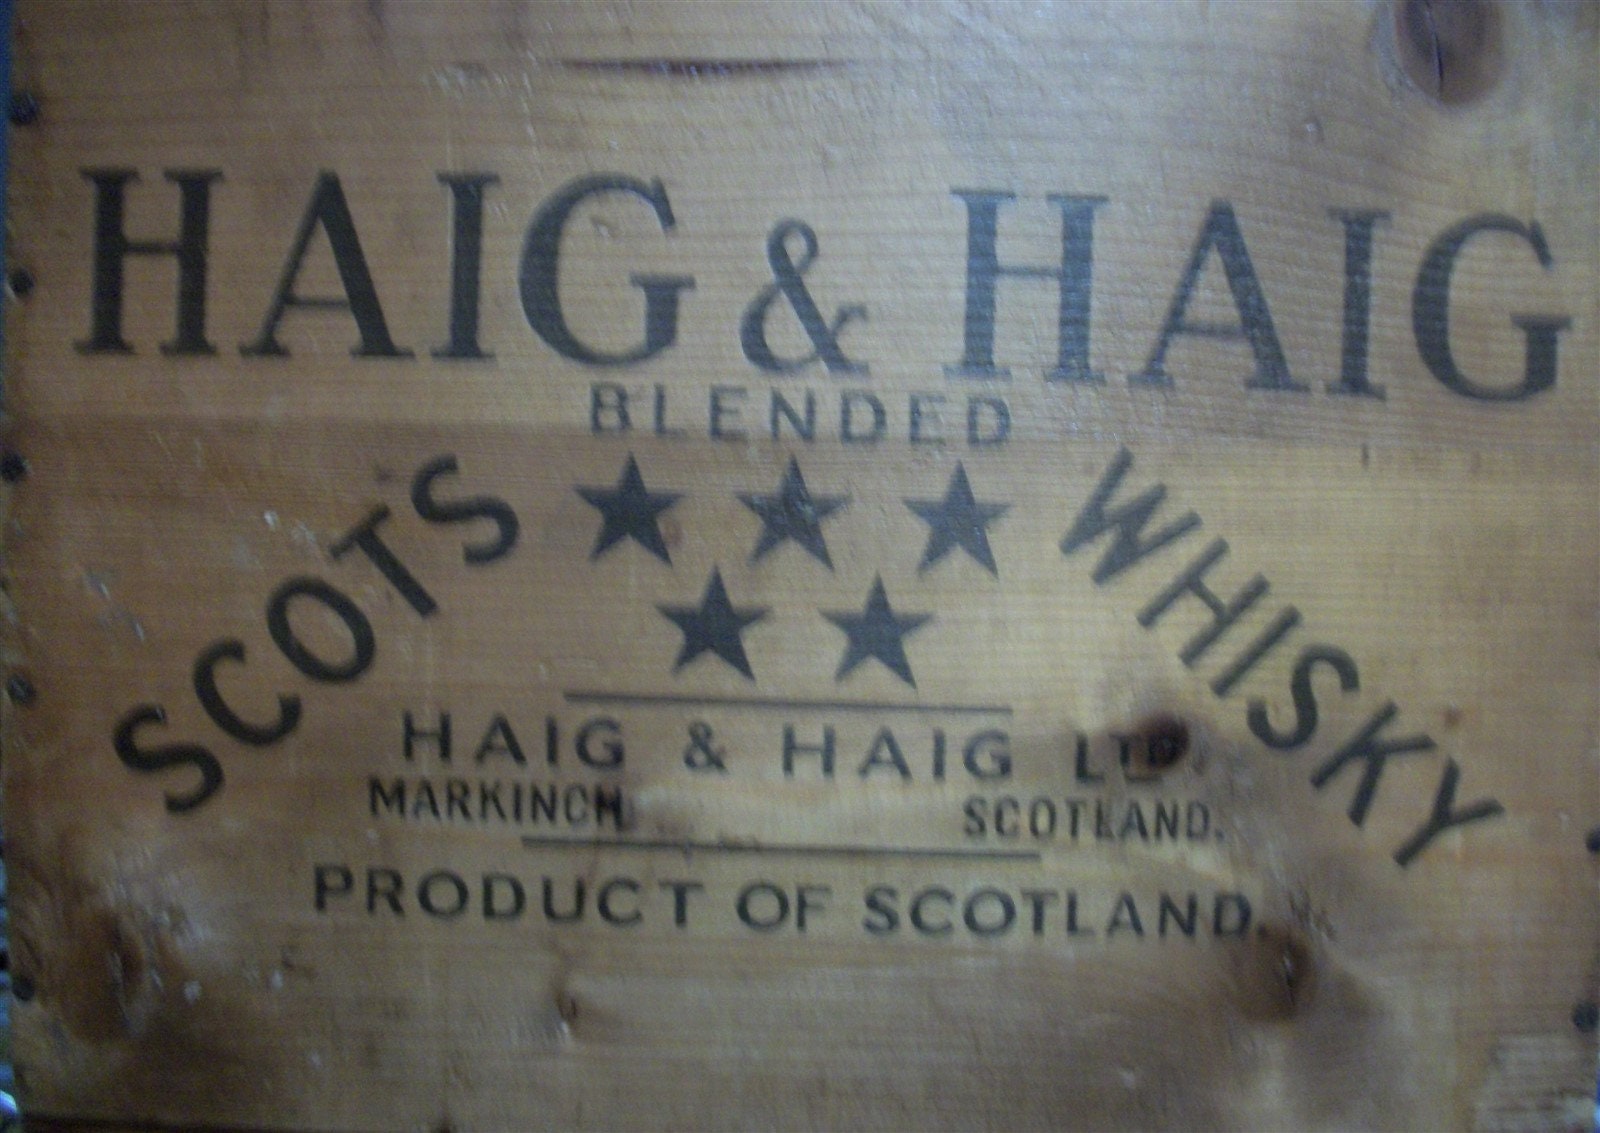 Haig & Haig Scots Whiskey Wooden Crate – NORTHERN GREAT LAKES TRADING CO.